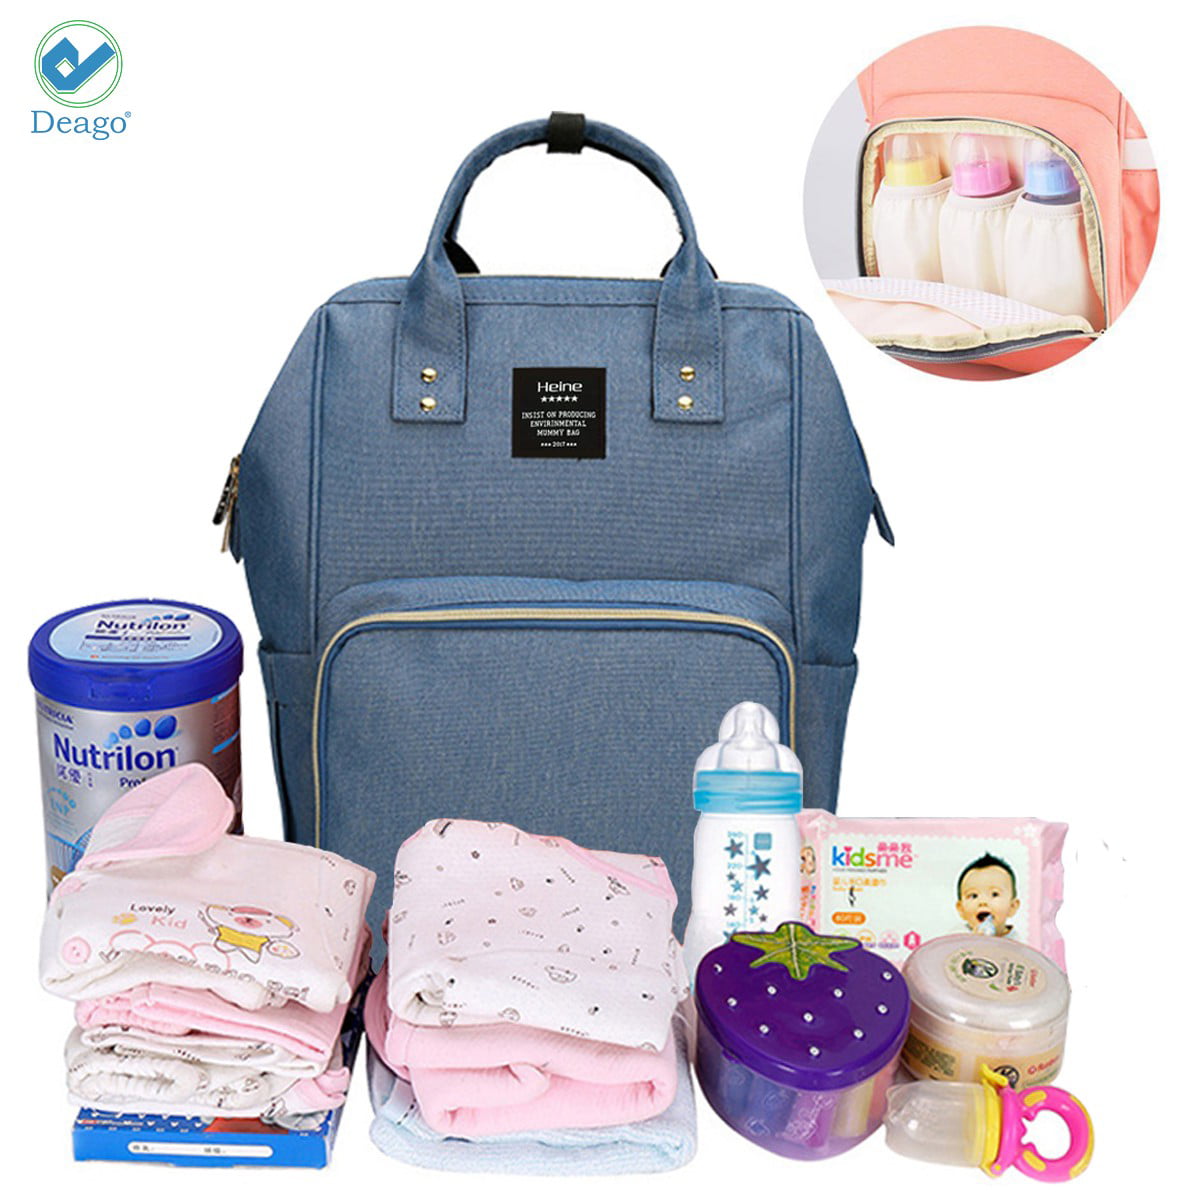 Large Capacity Waterproof Wide Open Design Baby Nappy Changing Bag Backpack Multi-Function for Mom/Dad Travel with Baby-Arrows Print